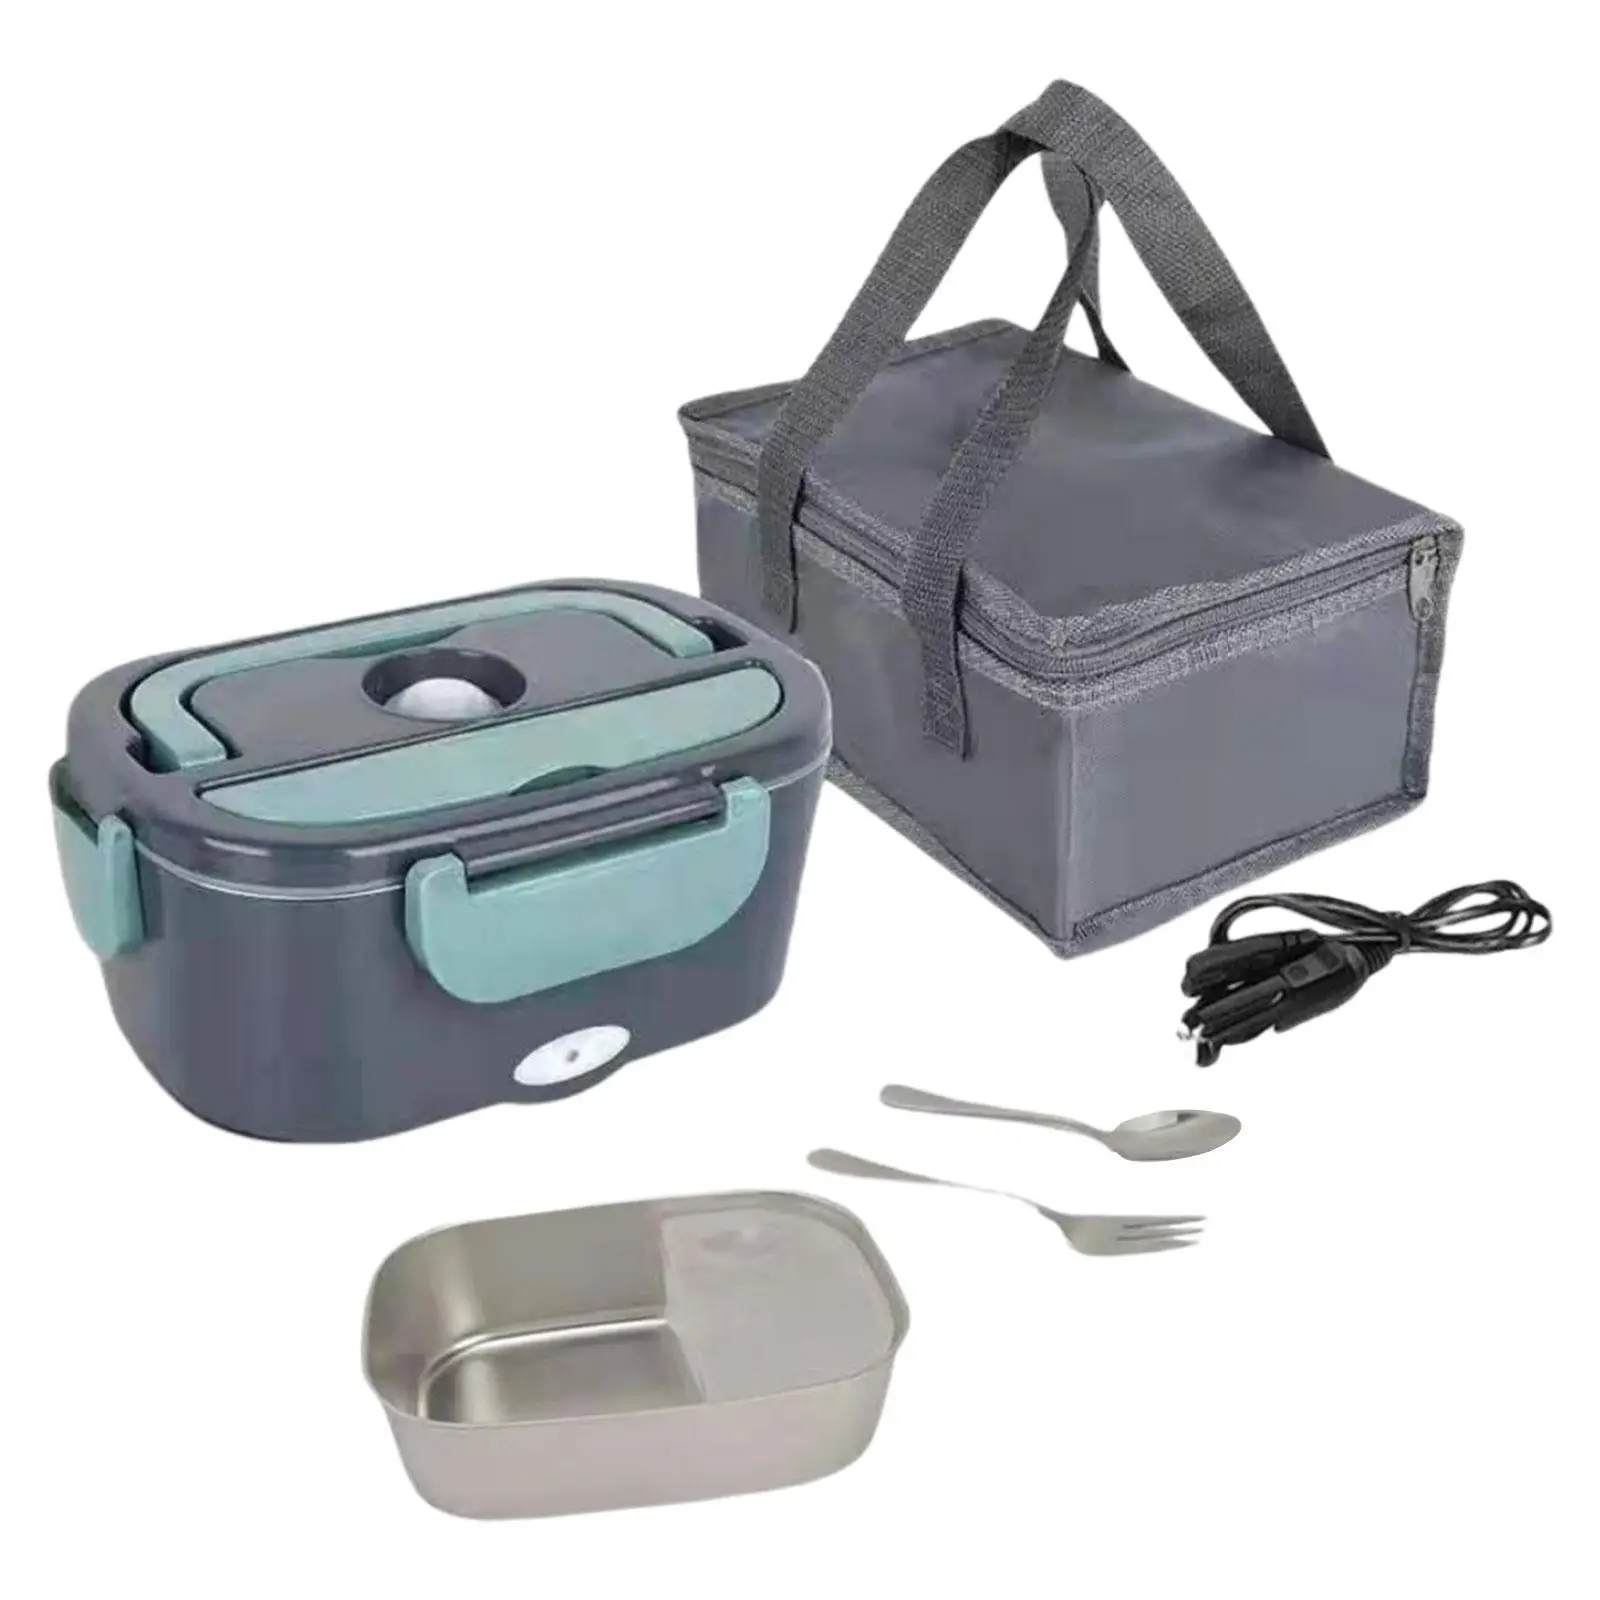 2 in 1 Electric Lunch Box 1.5L 40W with Fork & Spoon Stainless Steel Portable Heating Lunchbox Food Warmer for Home Truck Office